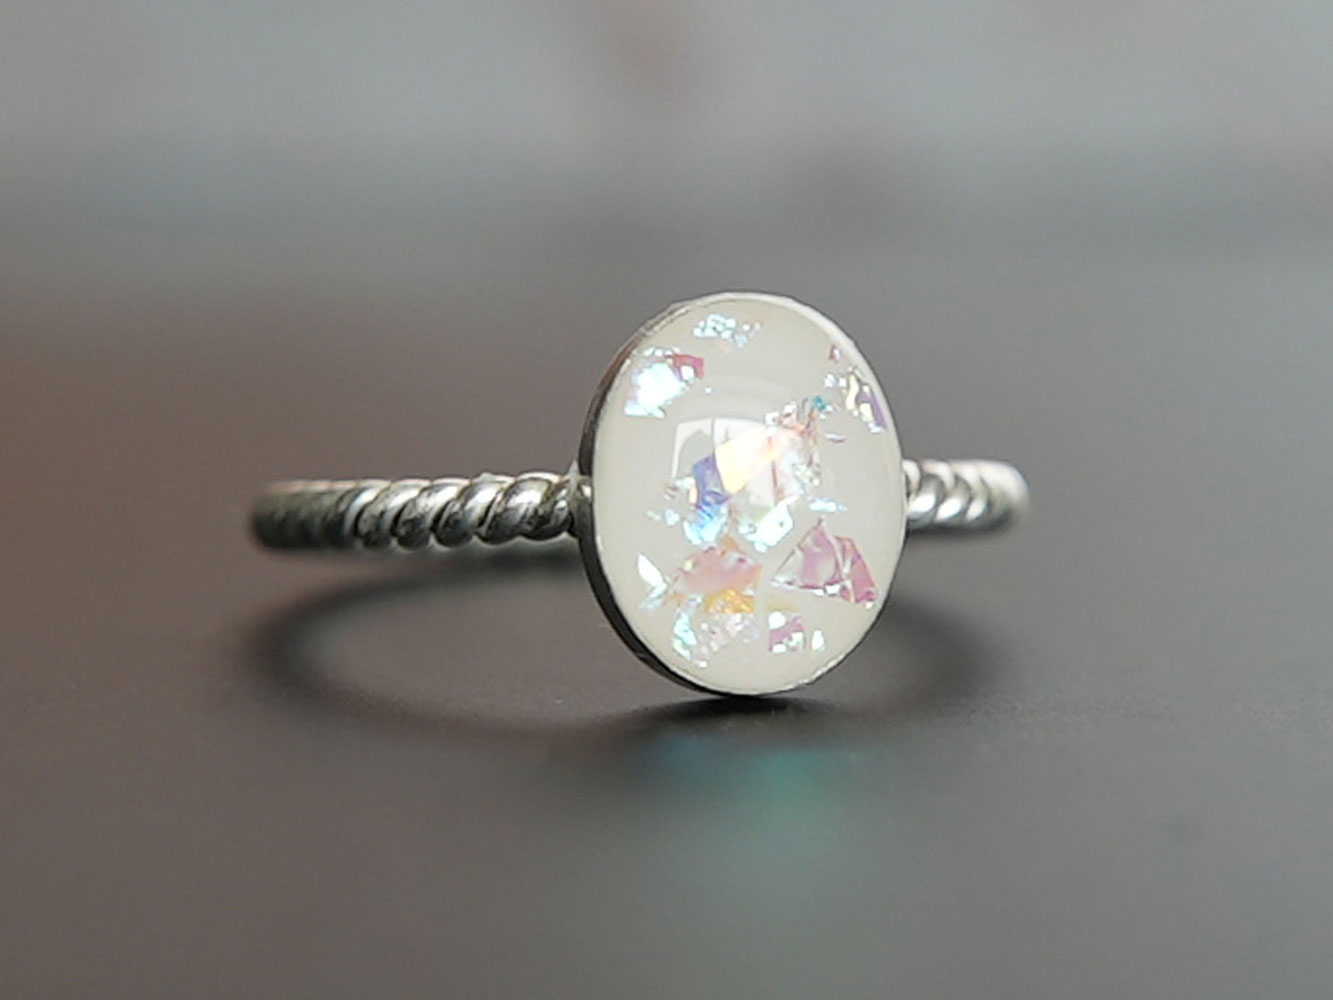 BUbreastmilk-ring-sterling-silver-oval